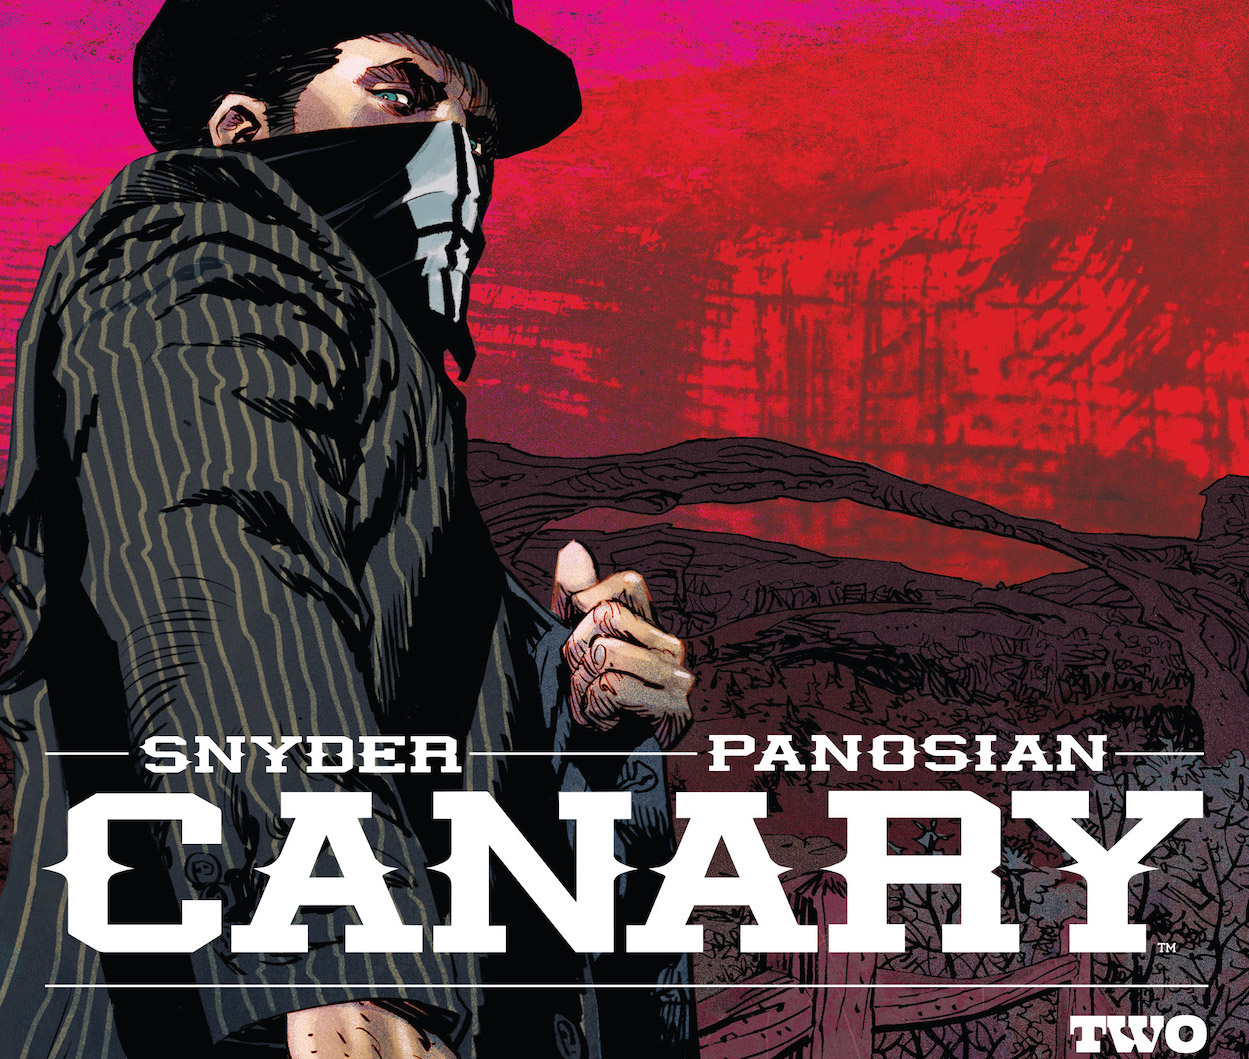 'Canary' #2 is a visually stunning western